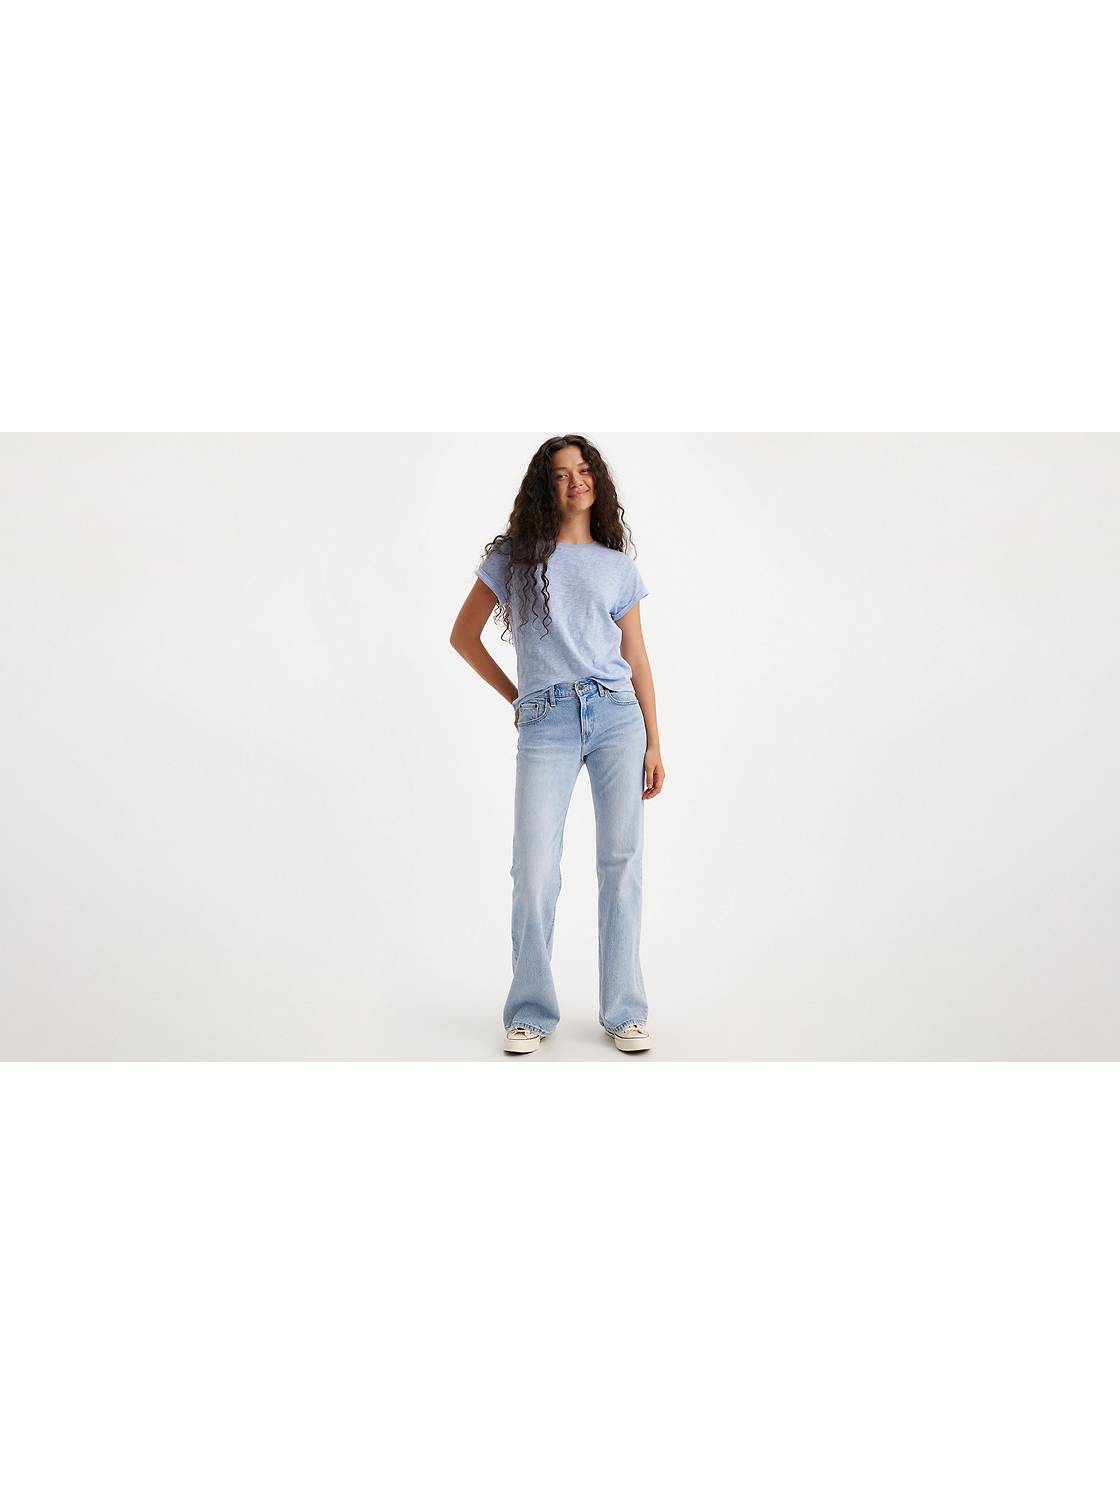 Levis Supreme Curve Skinny Jeans Womens 30 Mid Rise Stretch New